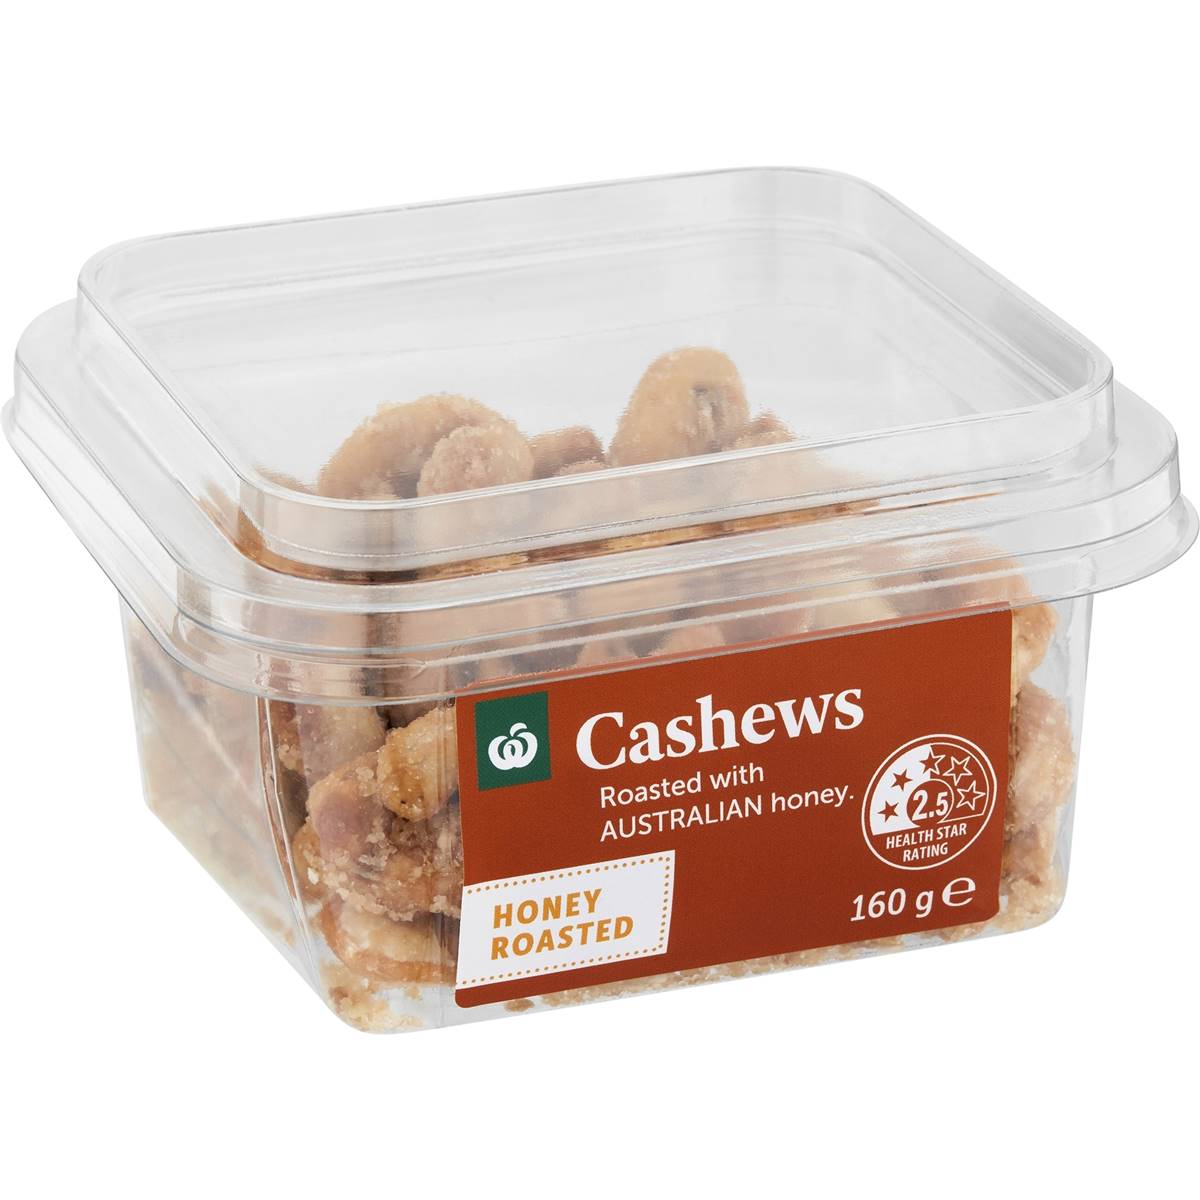 Calories in Woolworths Cashew Honey Snack Pots